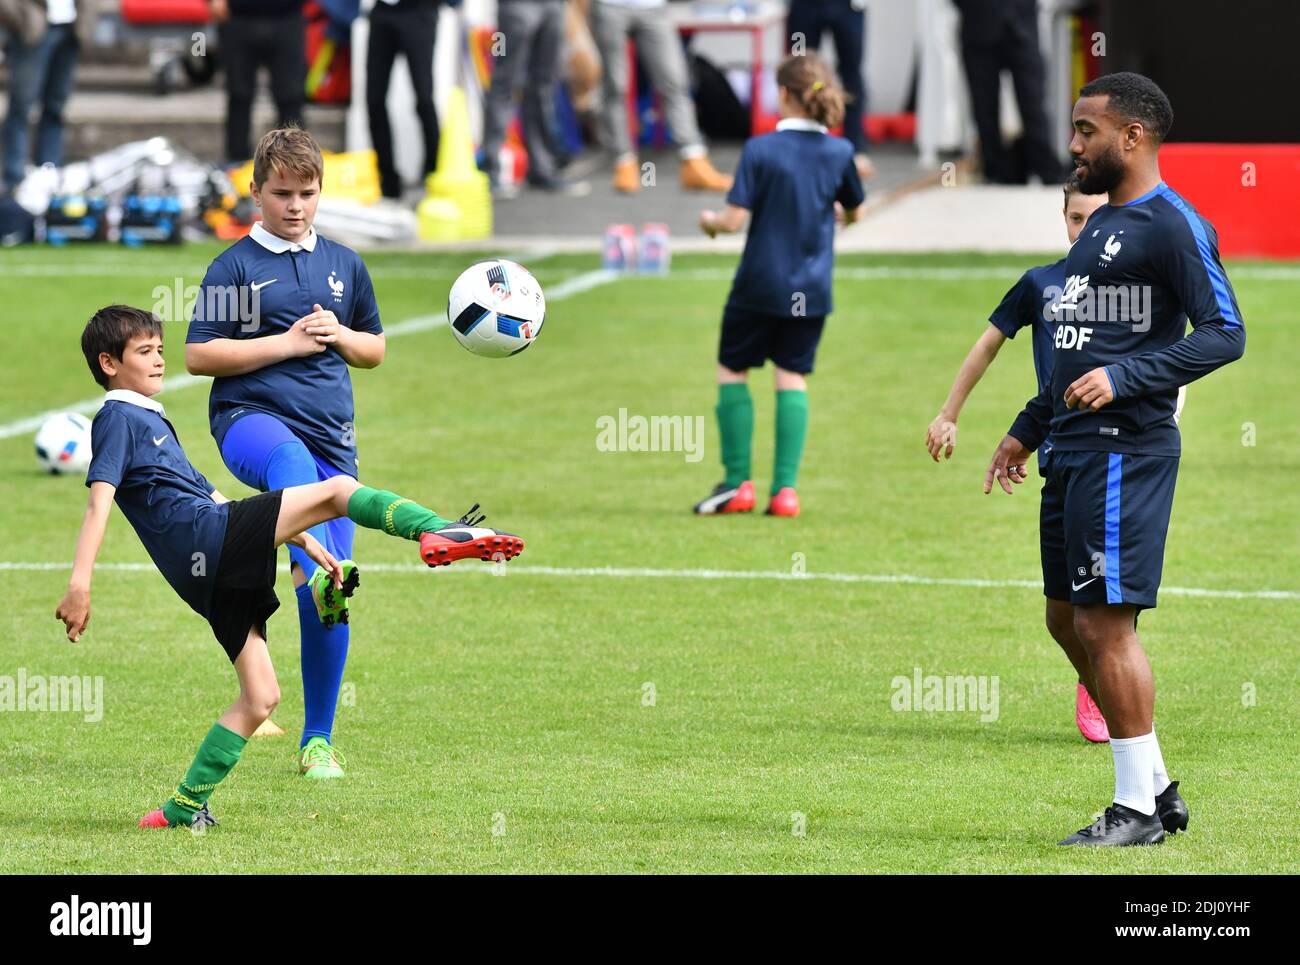 Alexandre Lacazette playing with children at the Aguilera stadium in Biarritz, France on May 18, 2016, as part of the team's preparation for the upcoming Euro 2016 European football championships. Photo by Pascal Rondeau/ABACAPRESS.COM Stock Photo